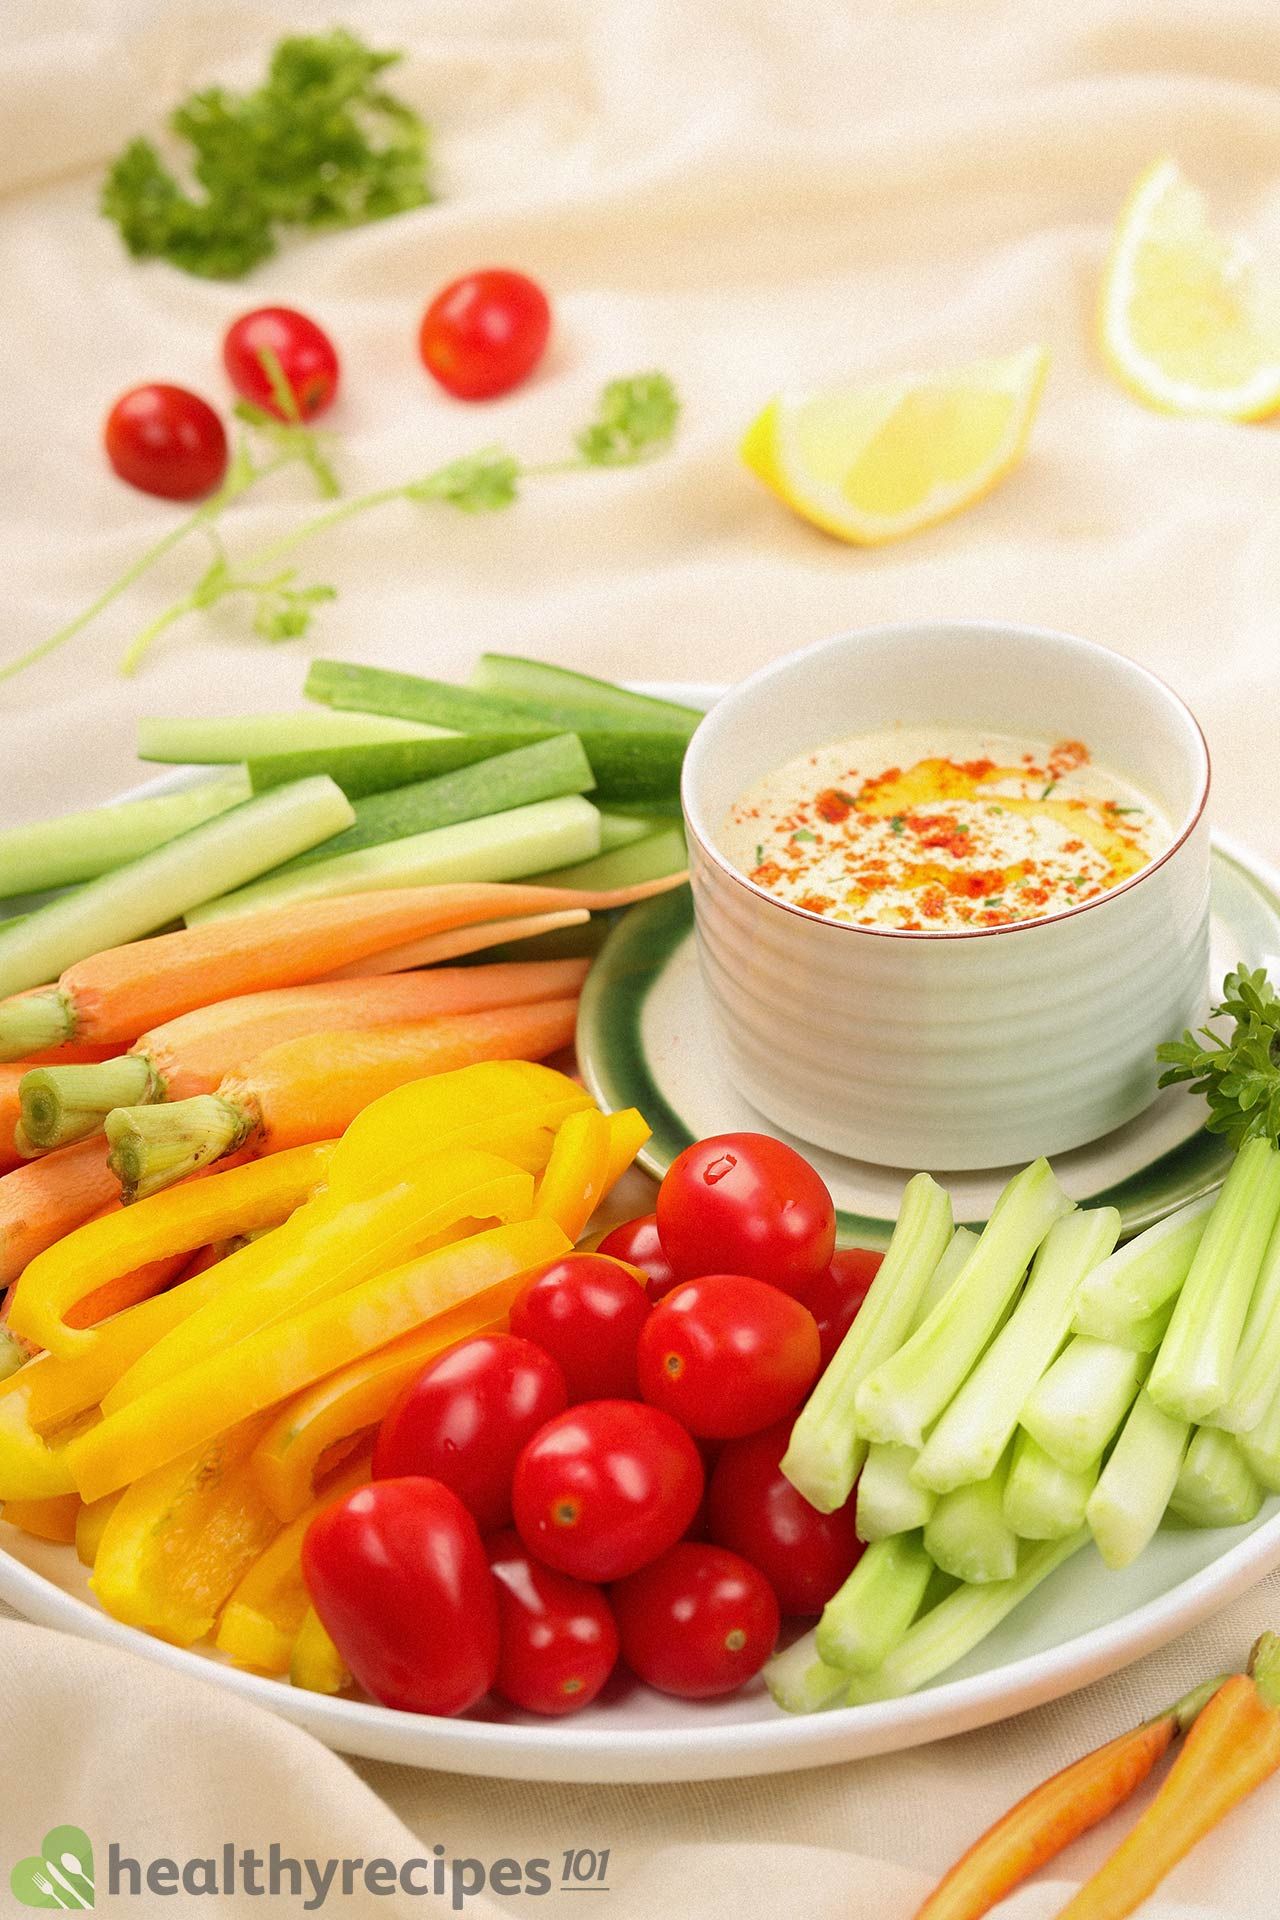 what are other healthy dips for vegetables